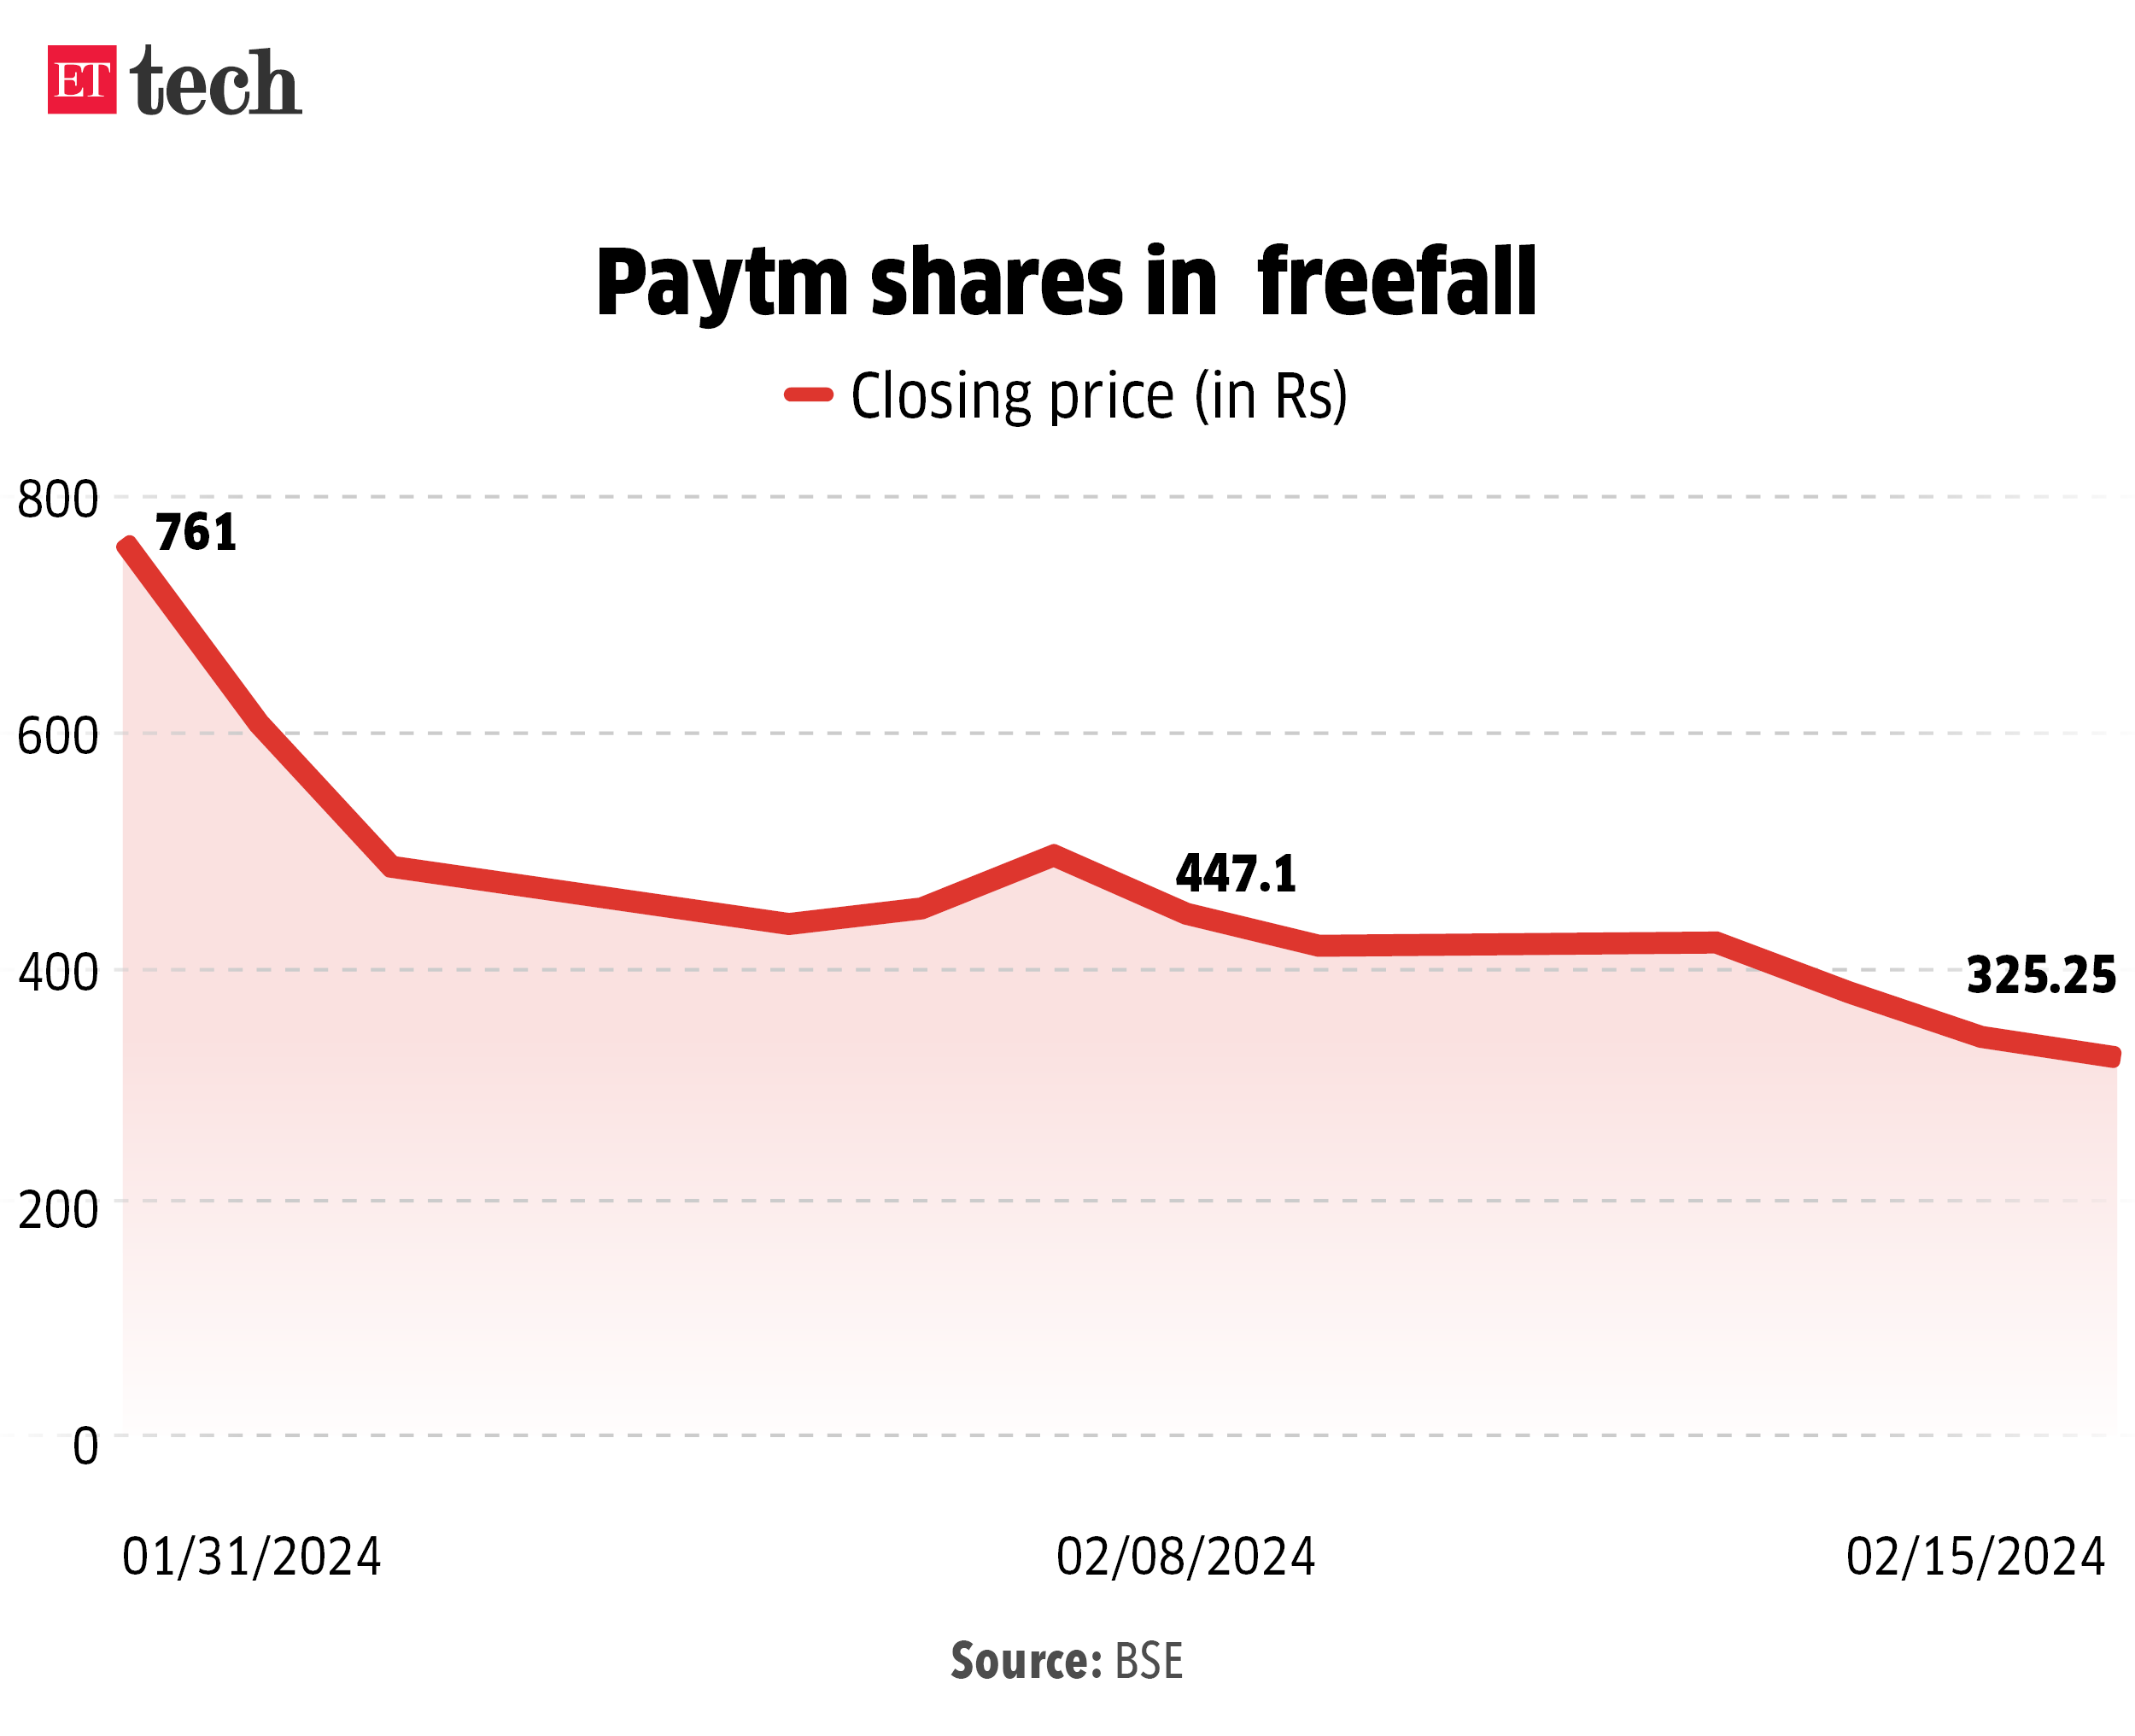 Paytm shares in freefall_Feb 2024_Graphic_ETTECH